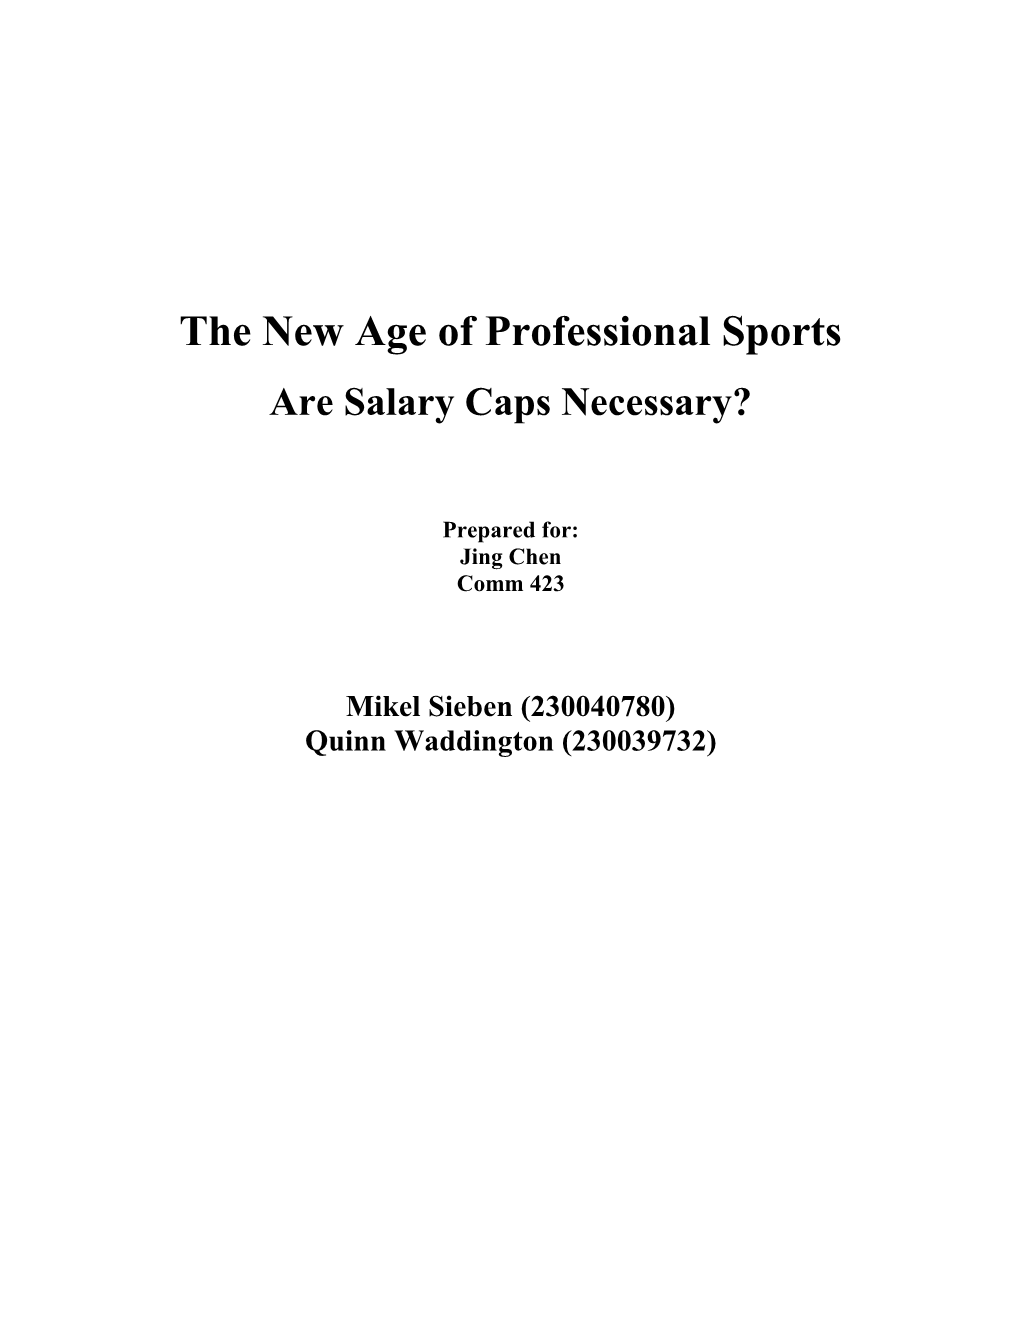 The New Age of Professional Sports